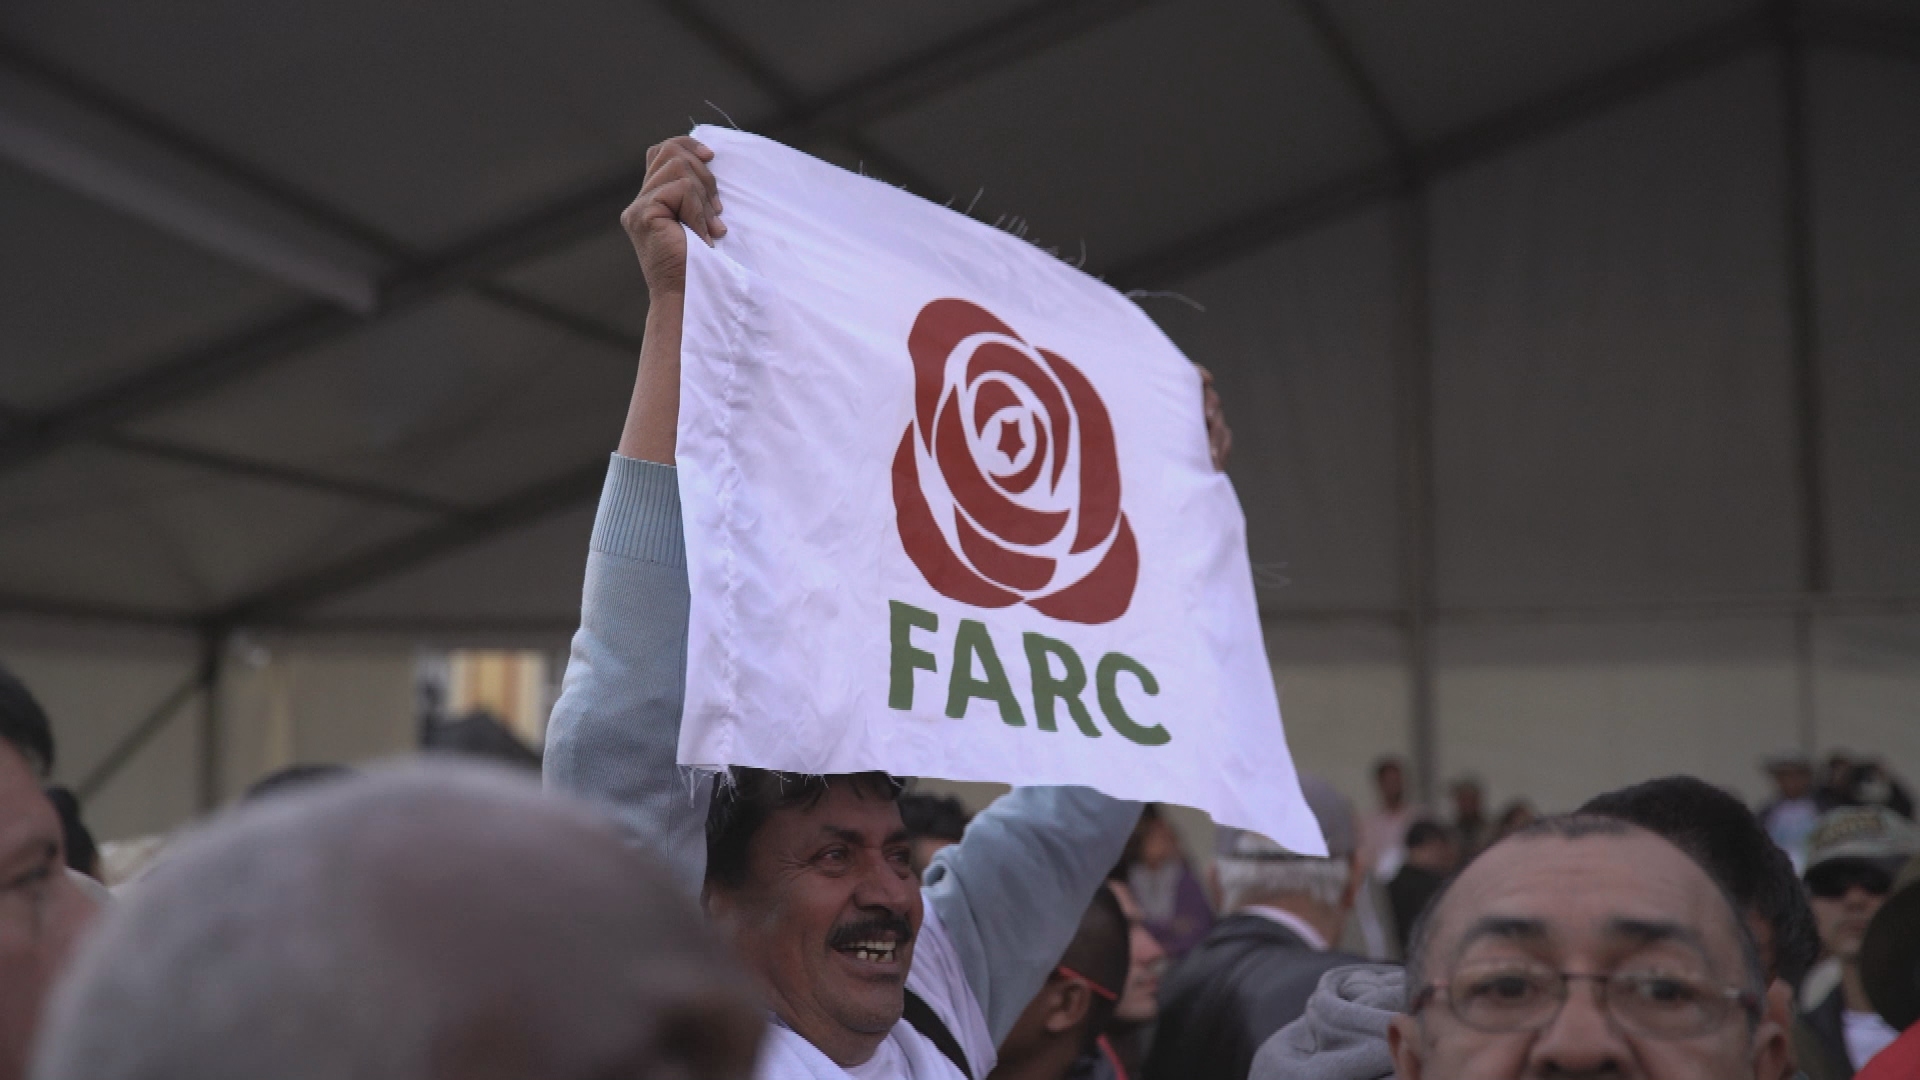 FARC’s new political party launches to both excitement and doubt